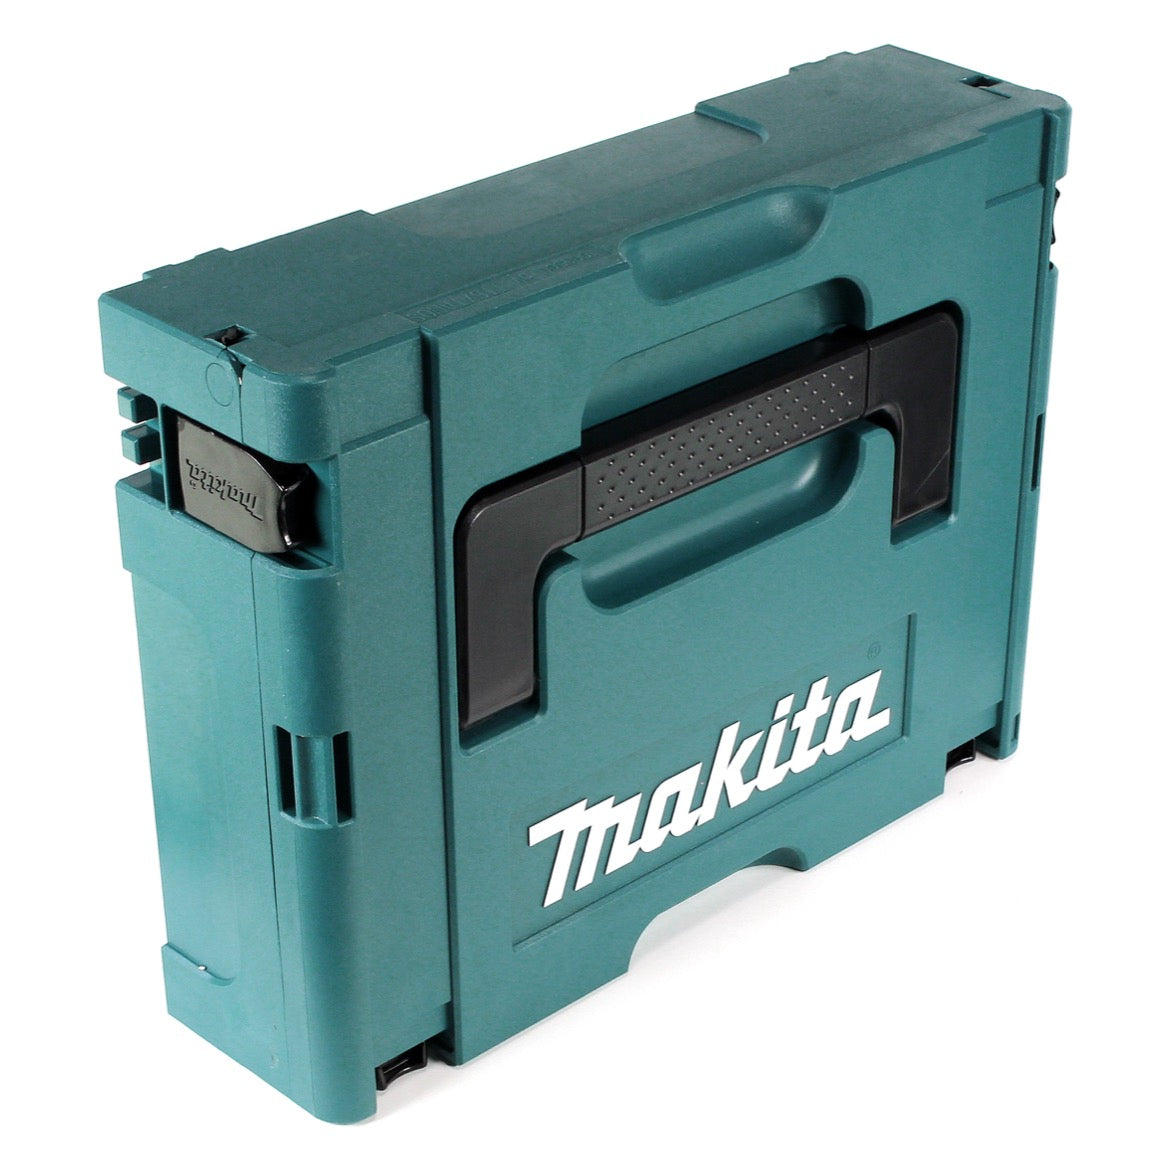 Makita MAKPAC 1 Systemkoffer - ohne Einlage - Toolbrothers